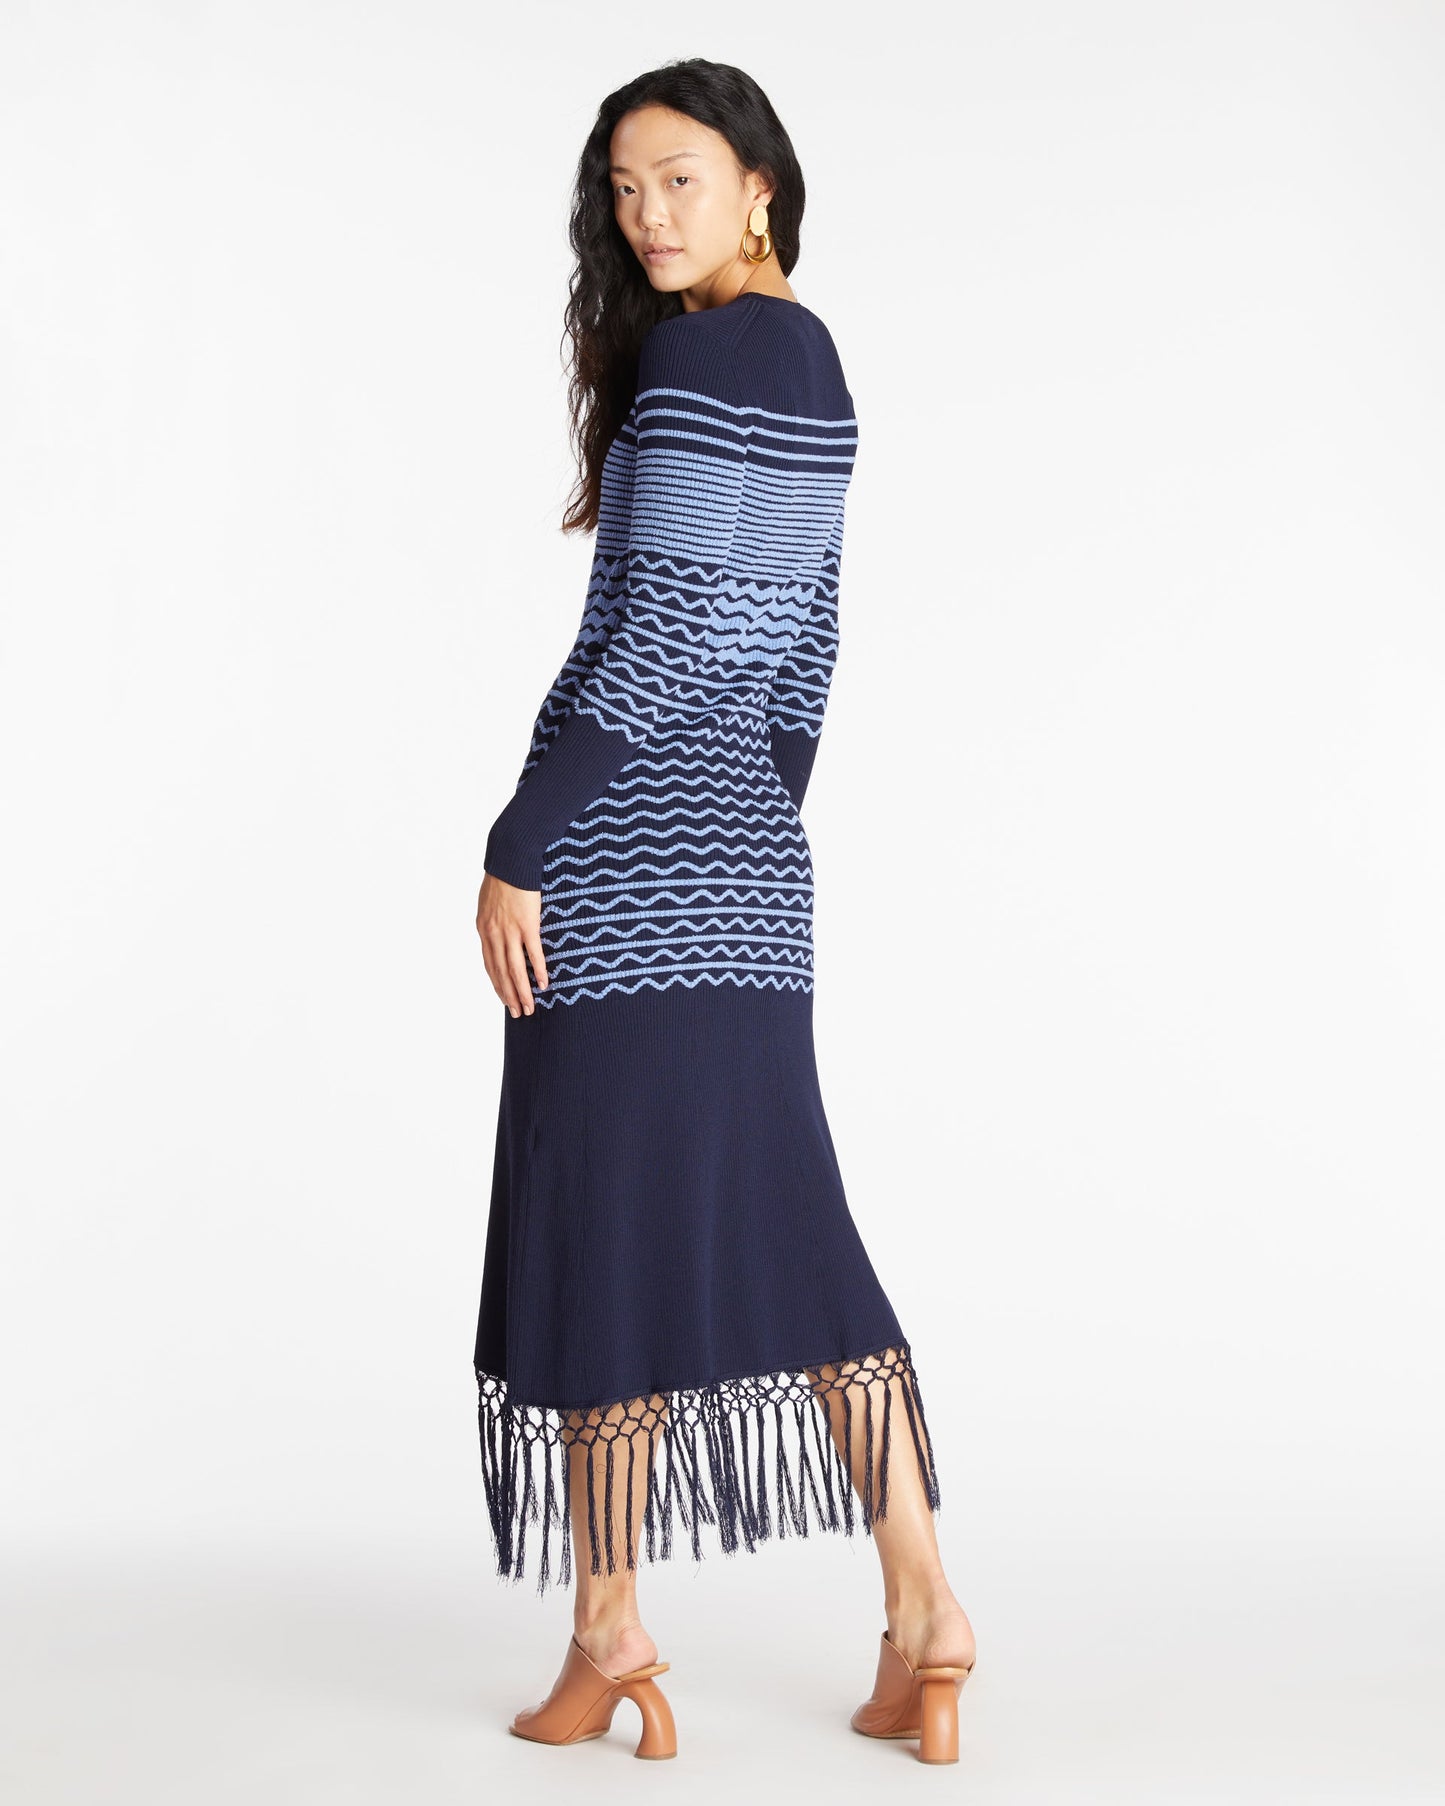 Terence Knit Dress